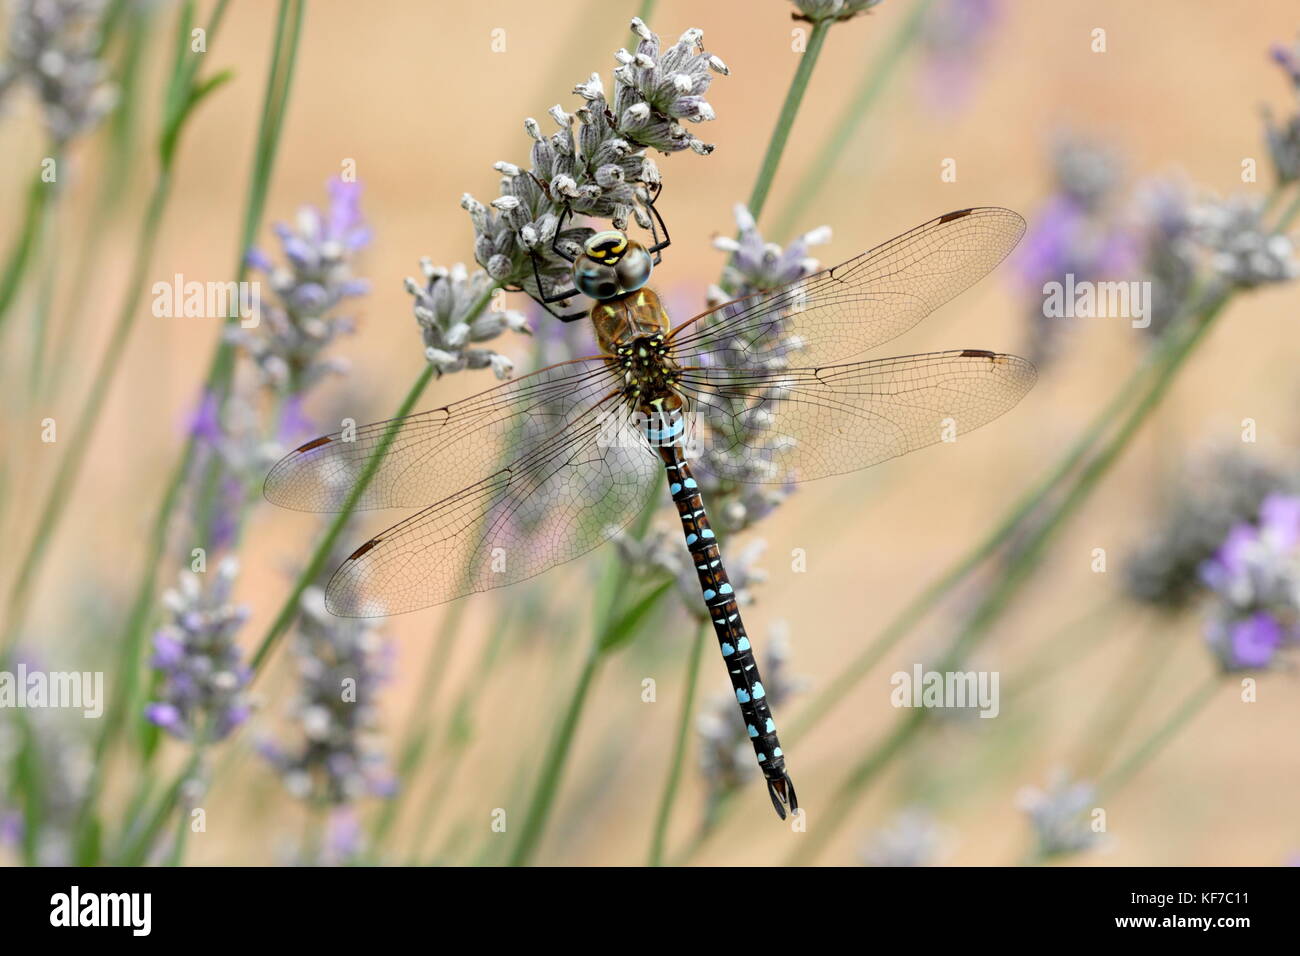 Male Migrant Hawker resting on Lavender flowers Stock Photo